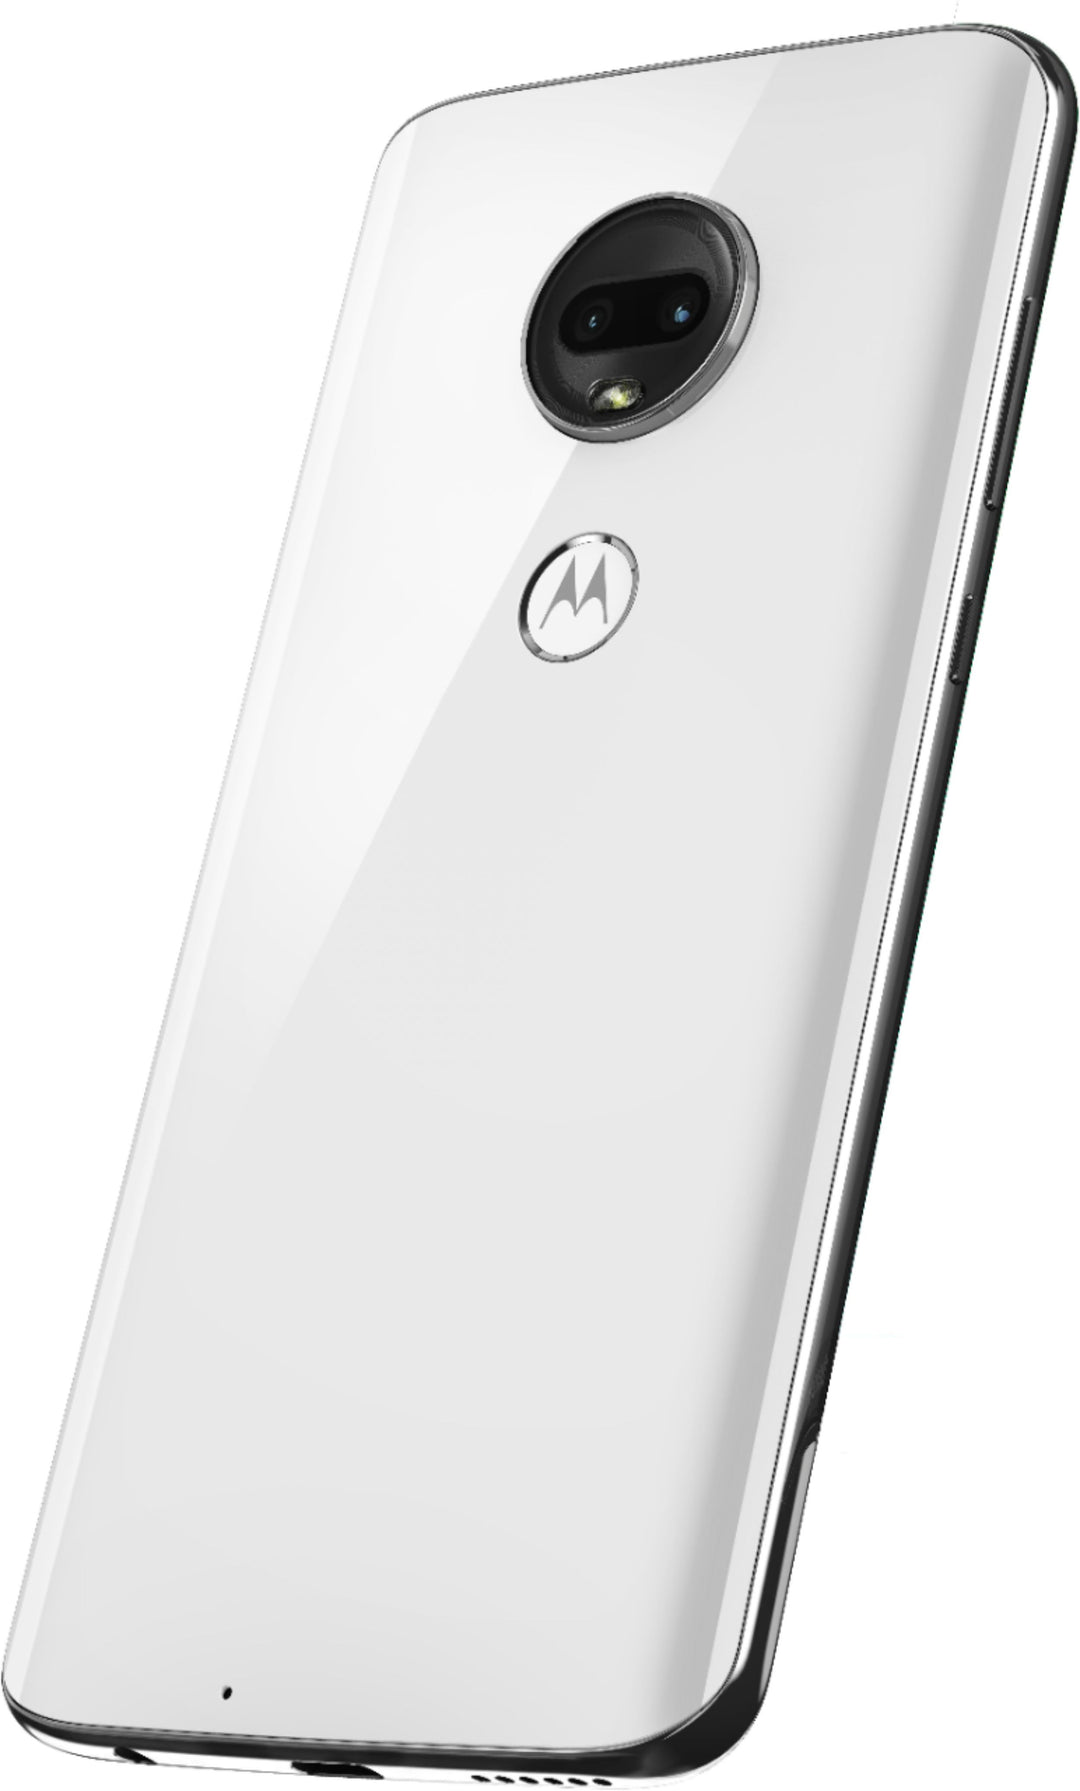 Motorola - Geek Squad Certified Refurbished moto g⁷ with 64GB Memory Cell Phone (Unlocked) - Clear White_8